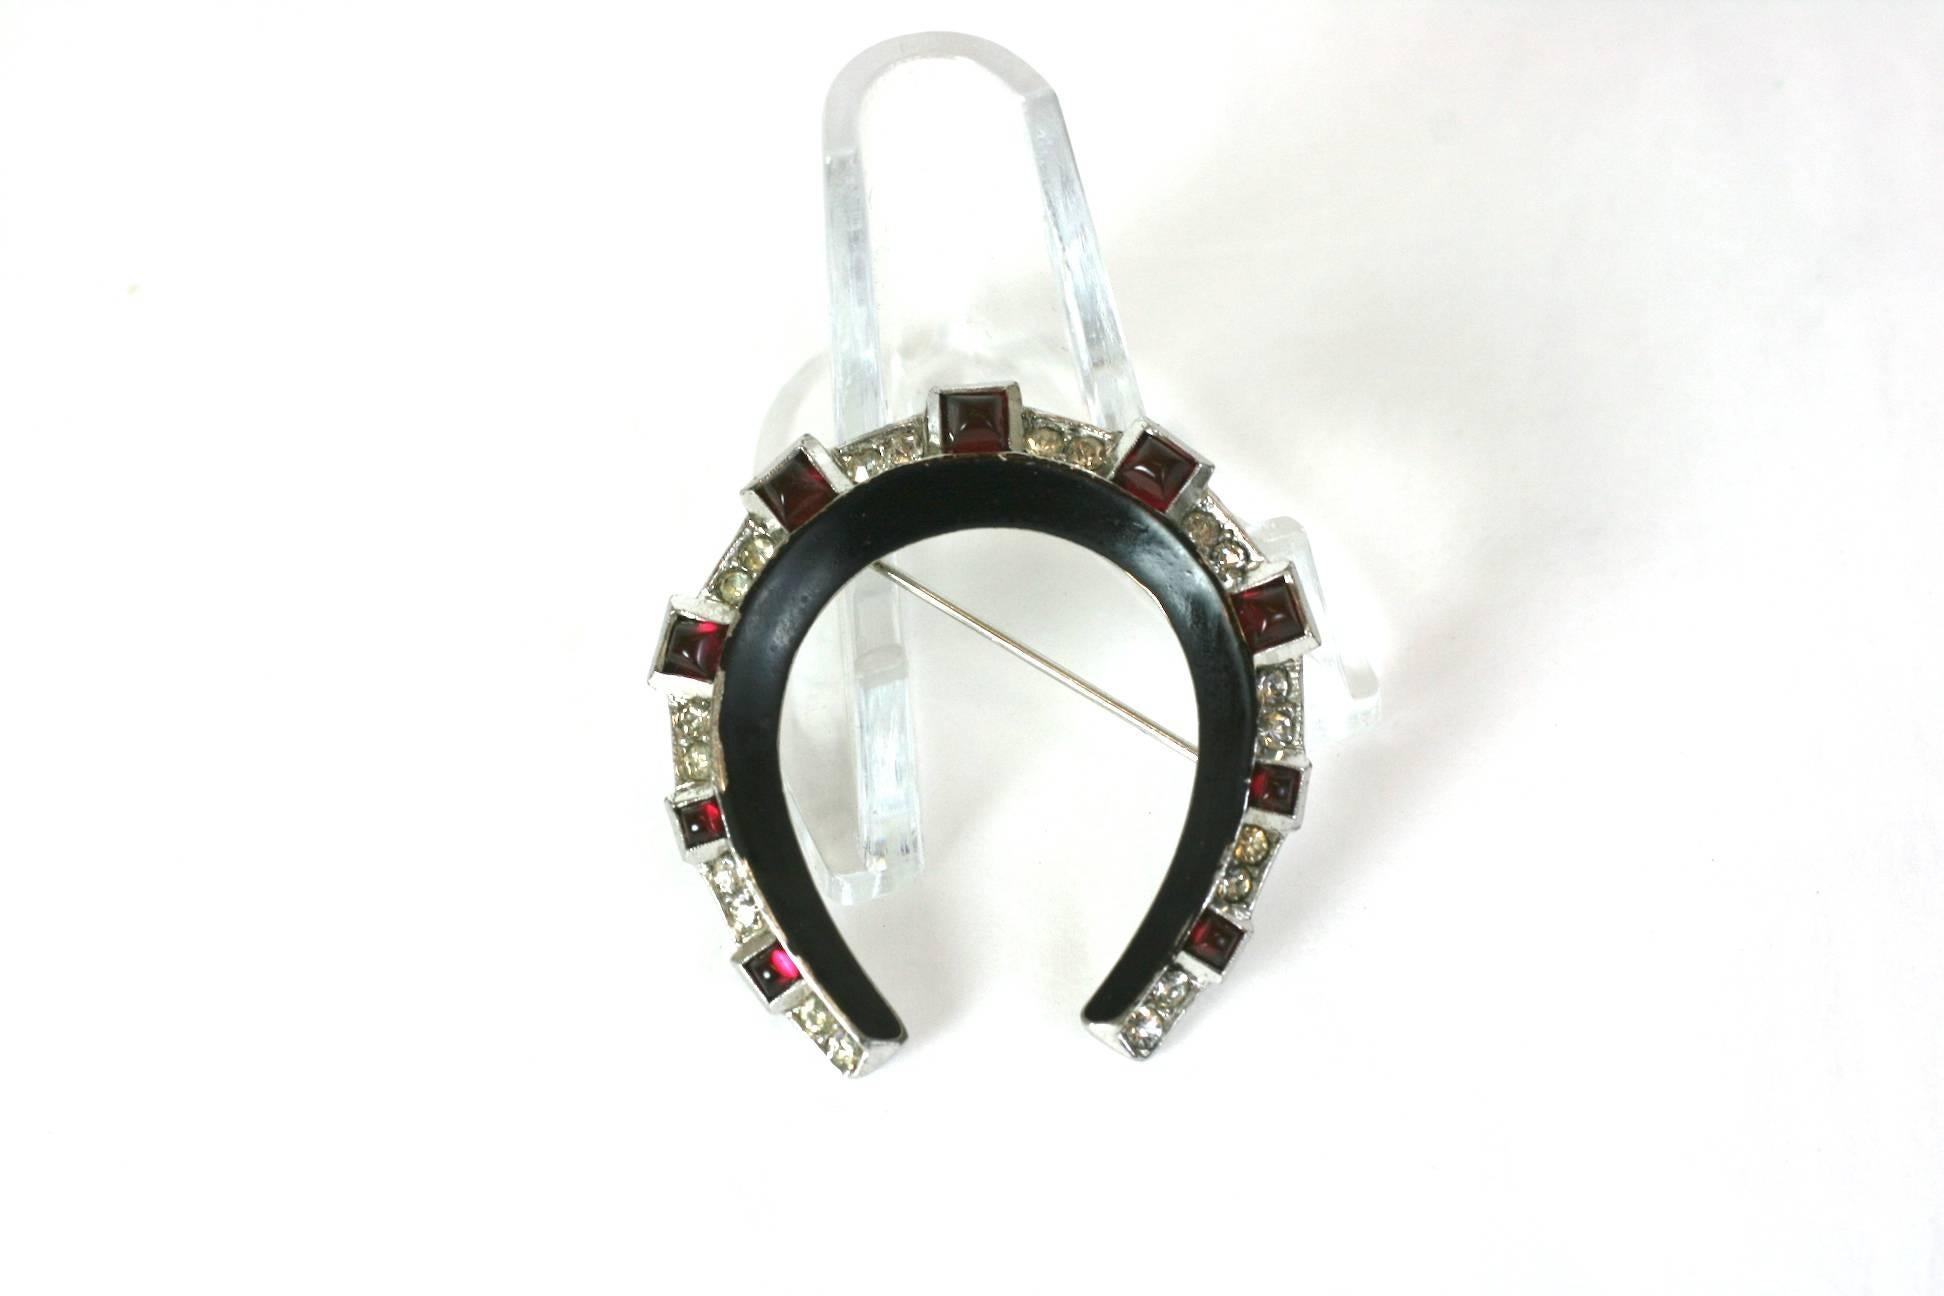 Trifari Art Deco Lucky Horseshoe Brooch. Black cold enamel on a rhodium plated ground highlighted by crystal pave and cabochon square cut faux rubies.
Excellent Condition, 1930's USA.  1.50